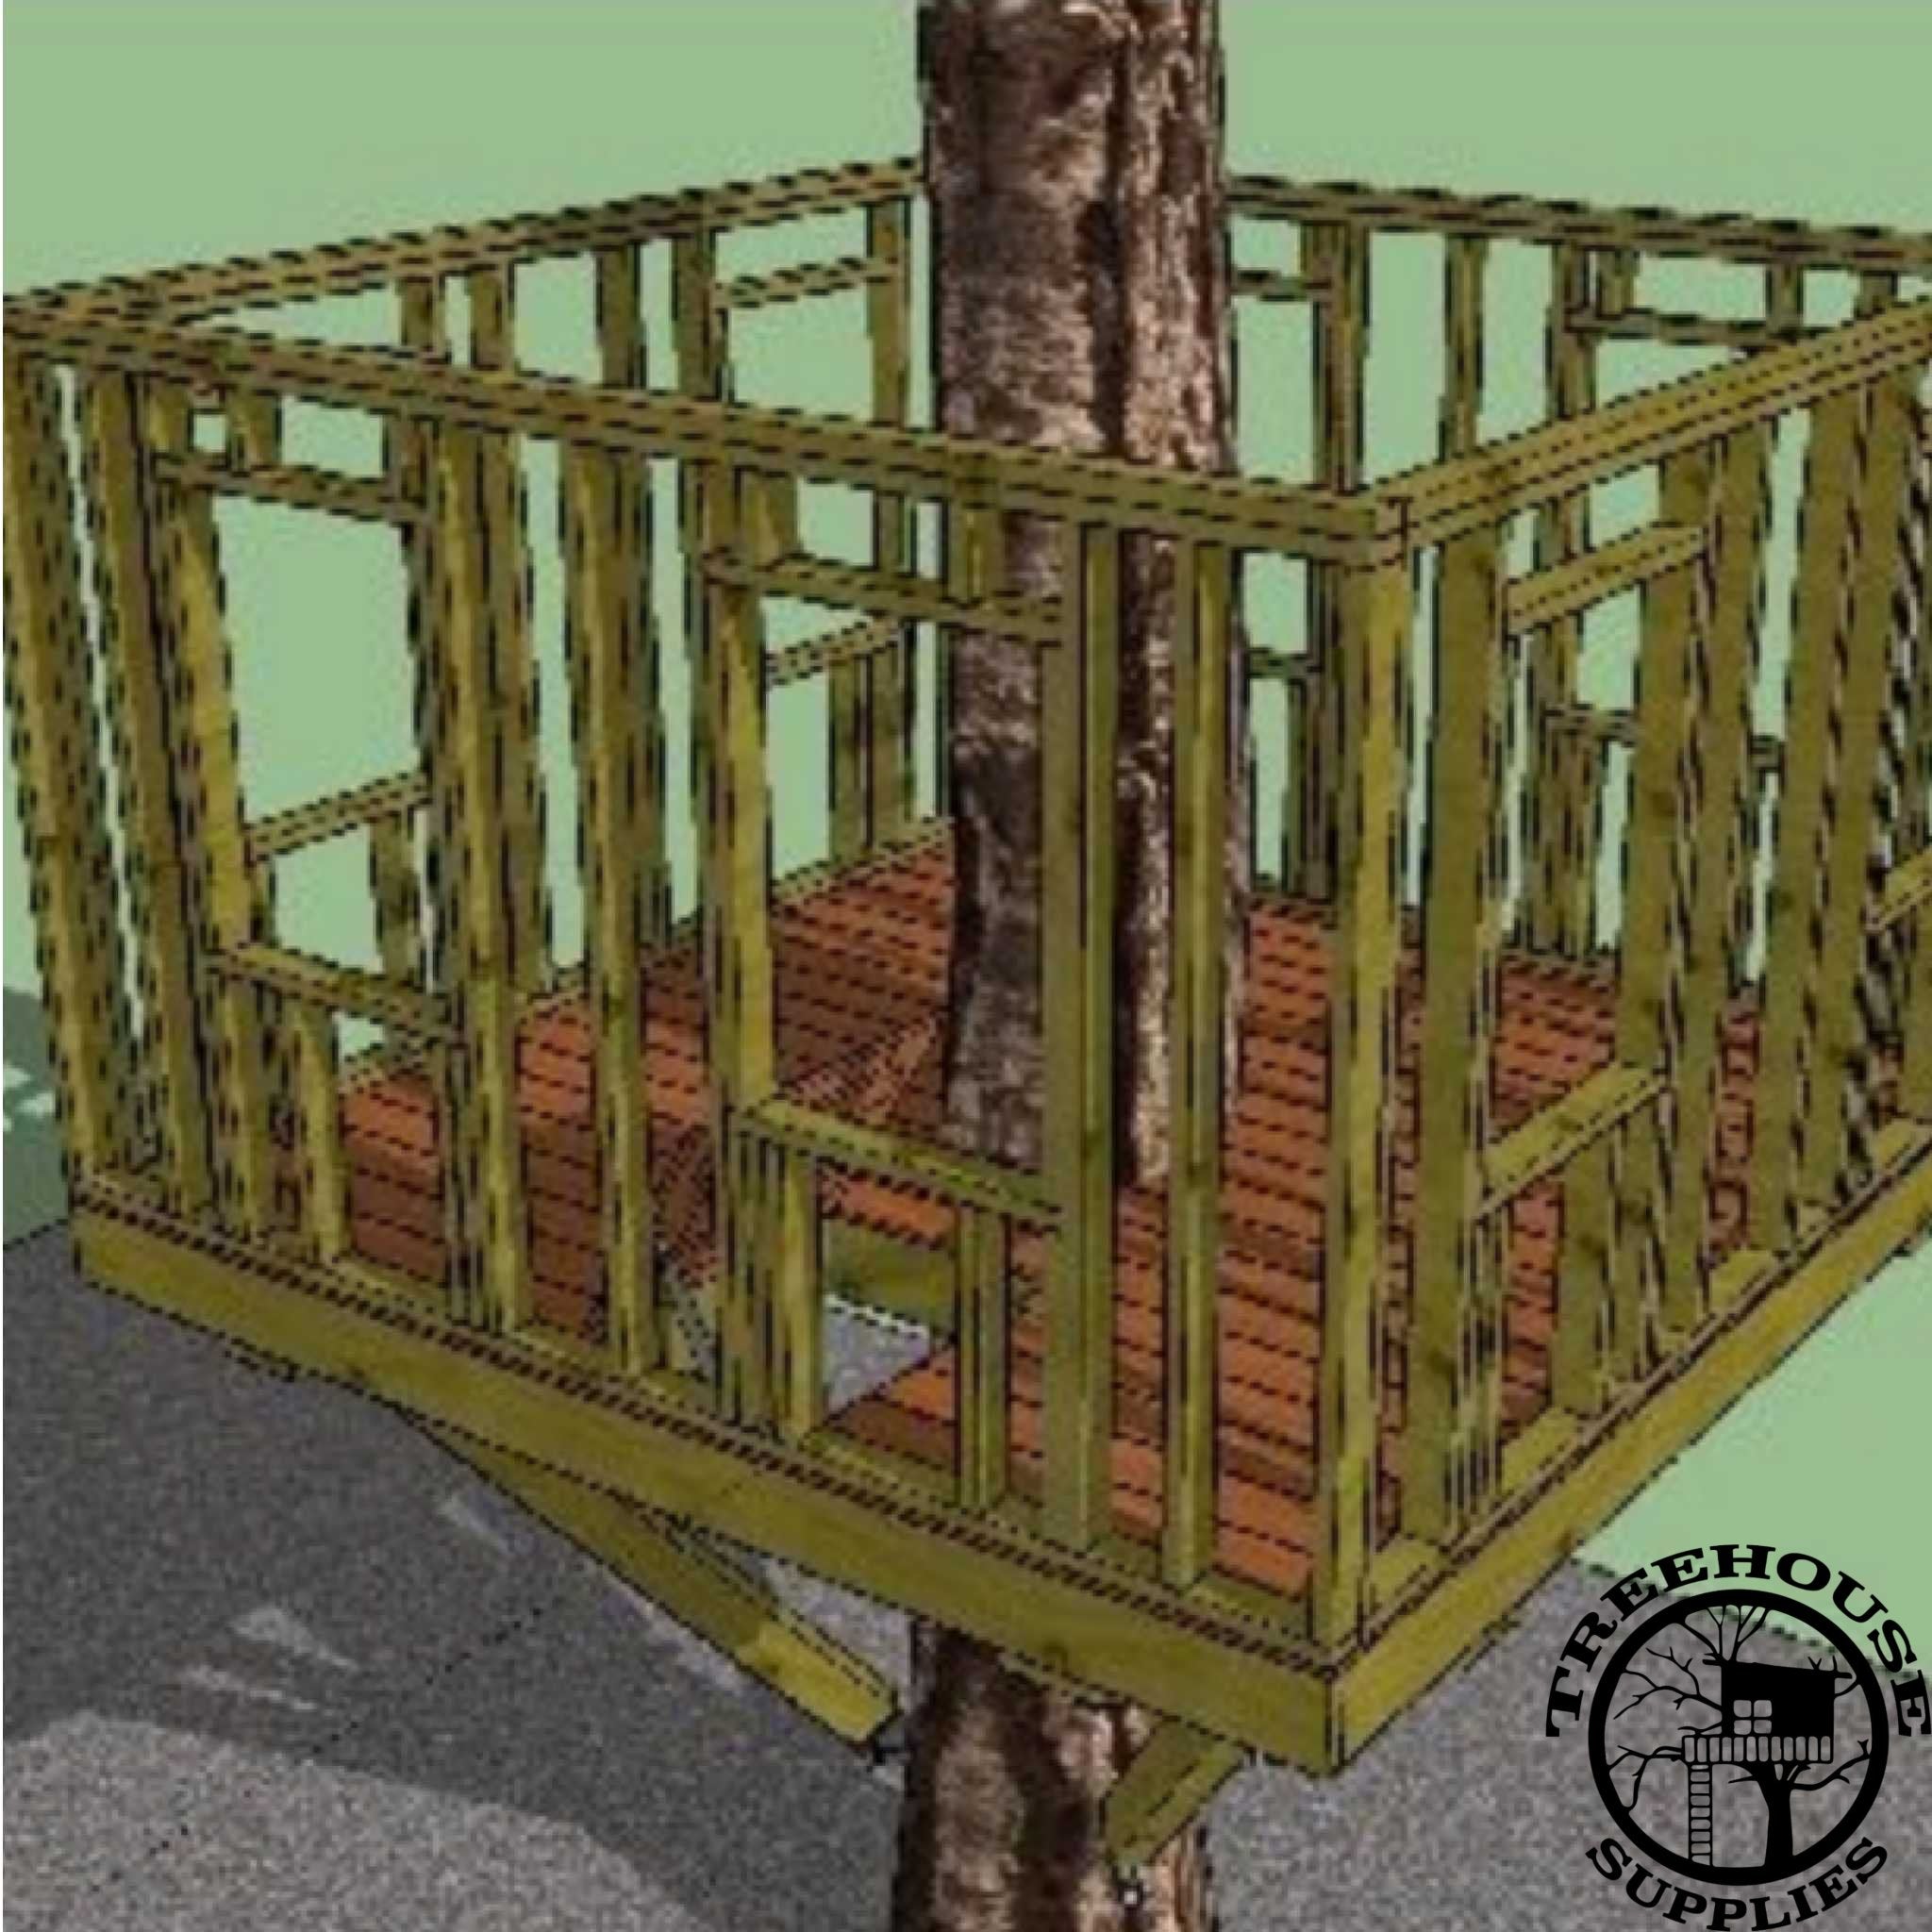 12' SQUARE TREEHOUSE PLAN - NOW INCLUDES STEP-BY-STEP 3D MODELING!! - Treehouse Supplies